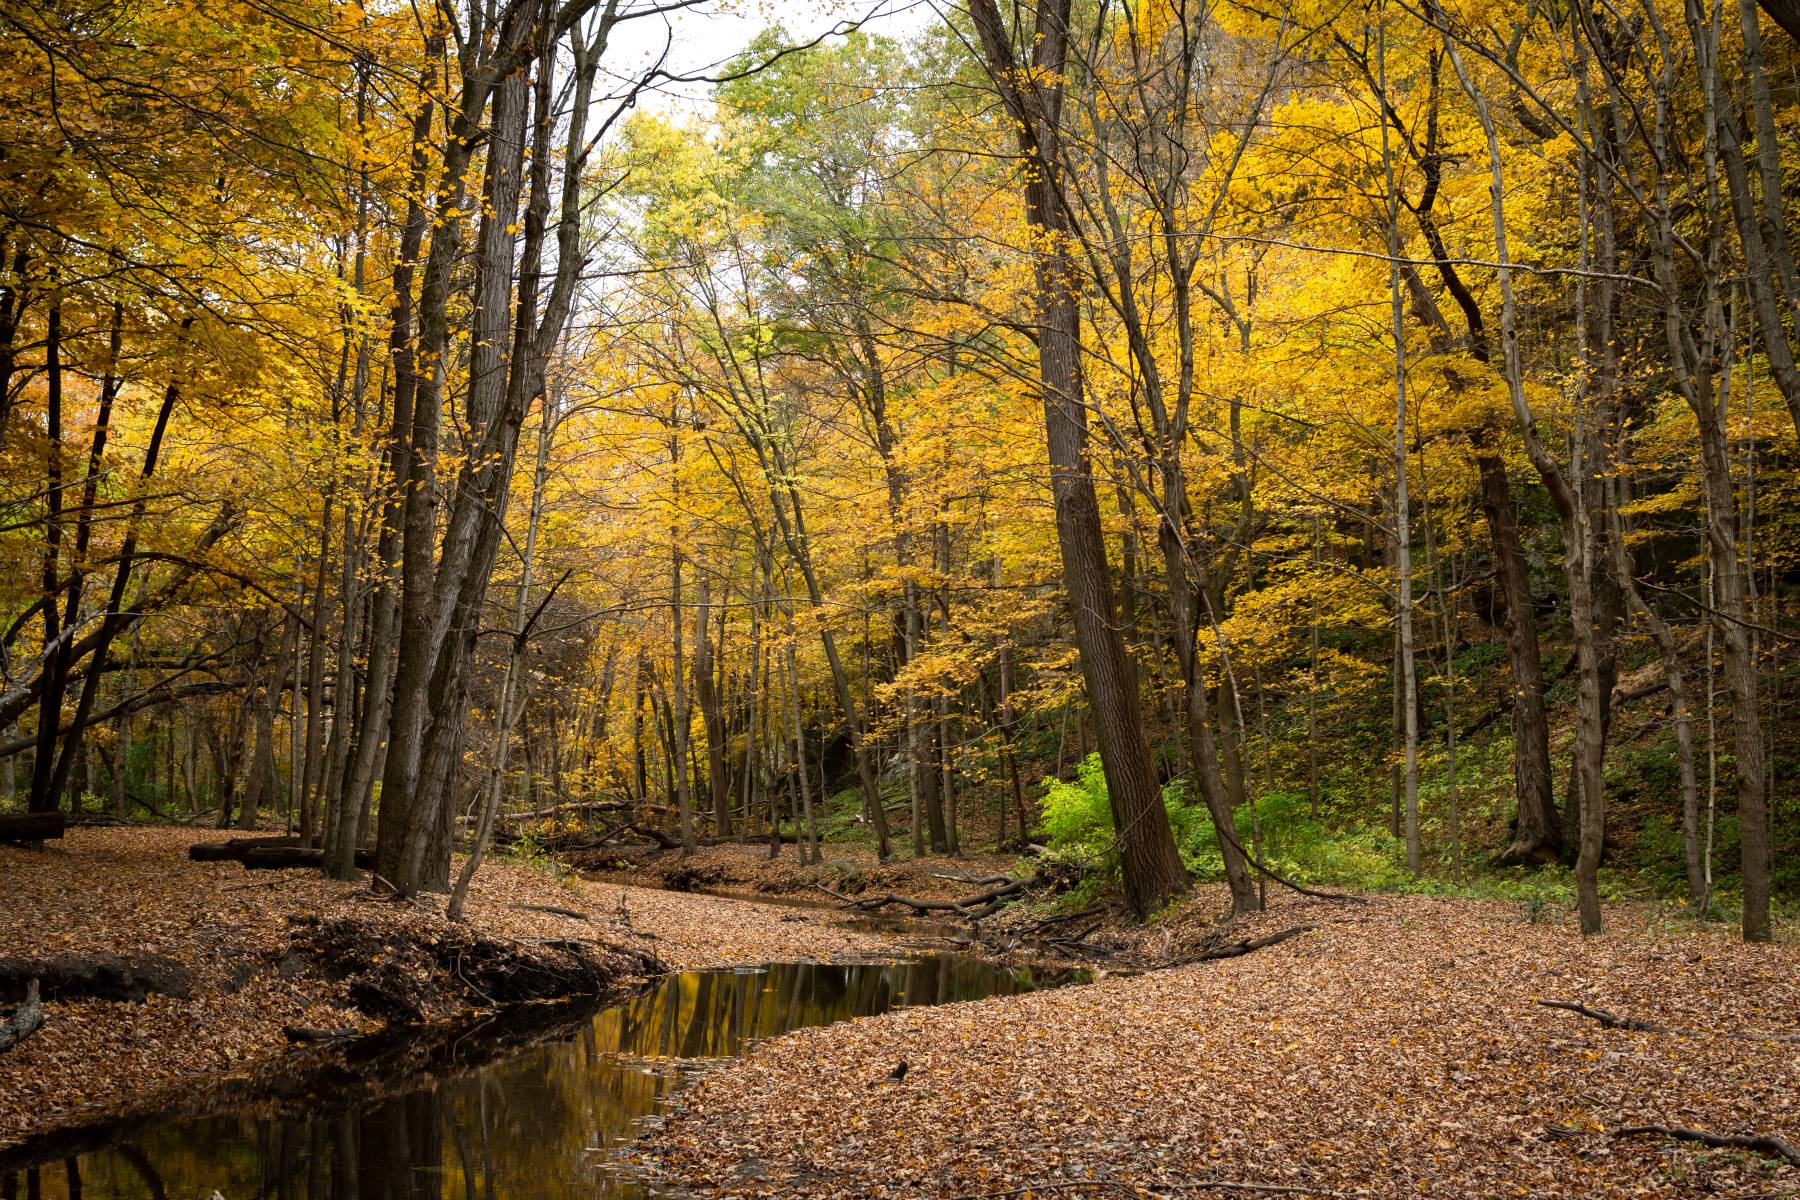 Starved Rock State Park has some of the best fall foliage in Illinois